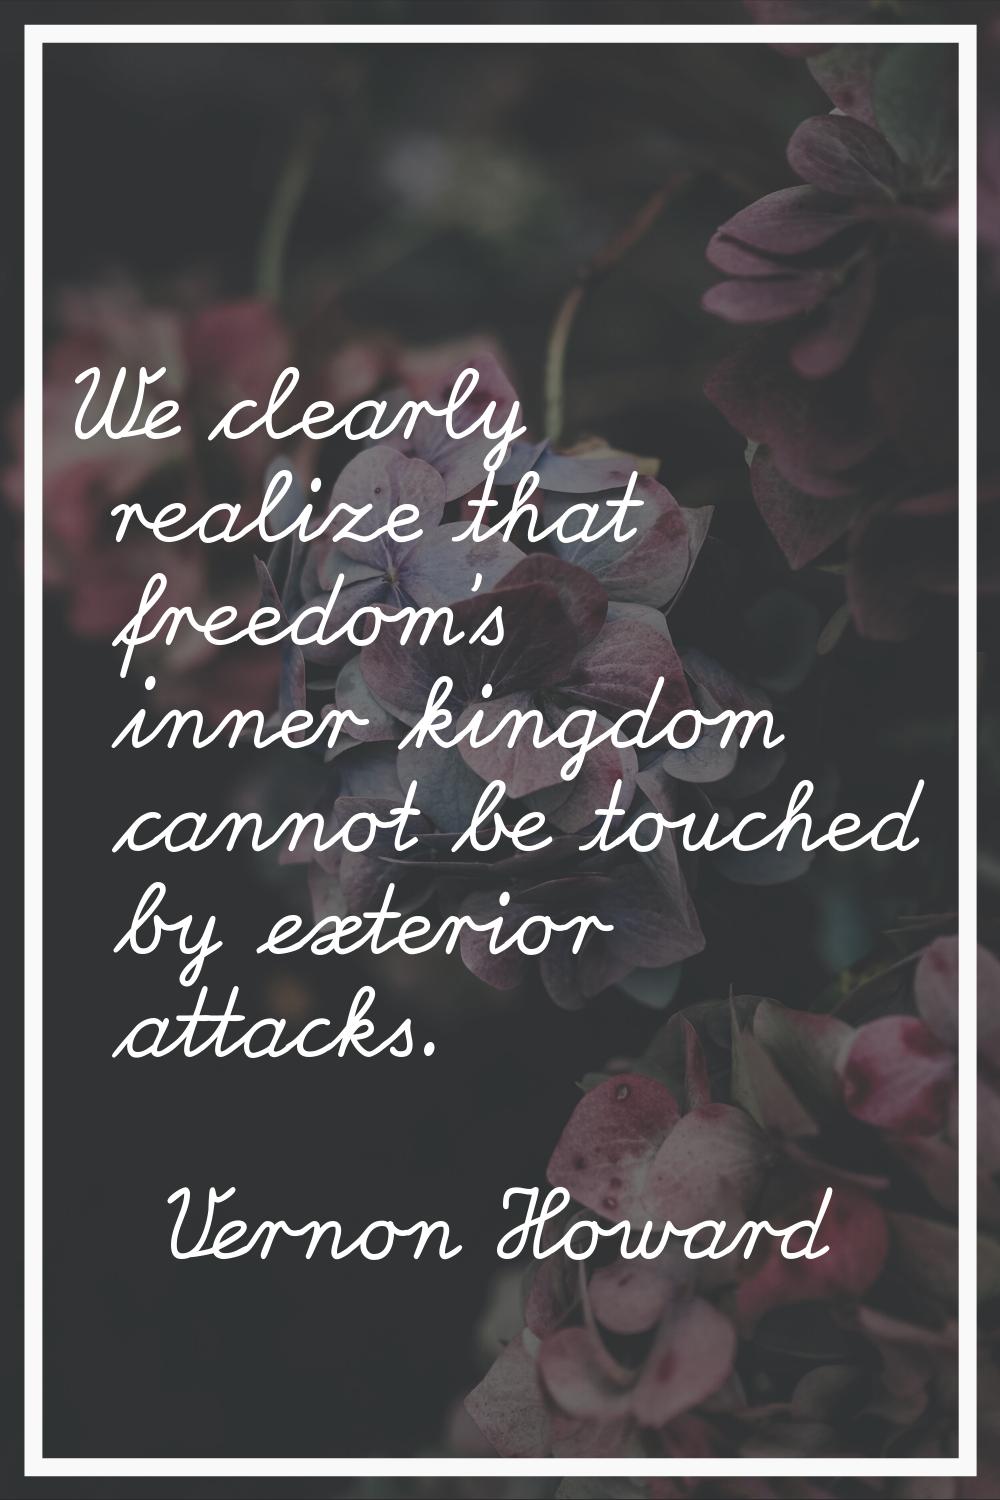 We clearly realize that freedom's inner kingdom cannot be touched by exterior attacks.